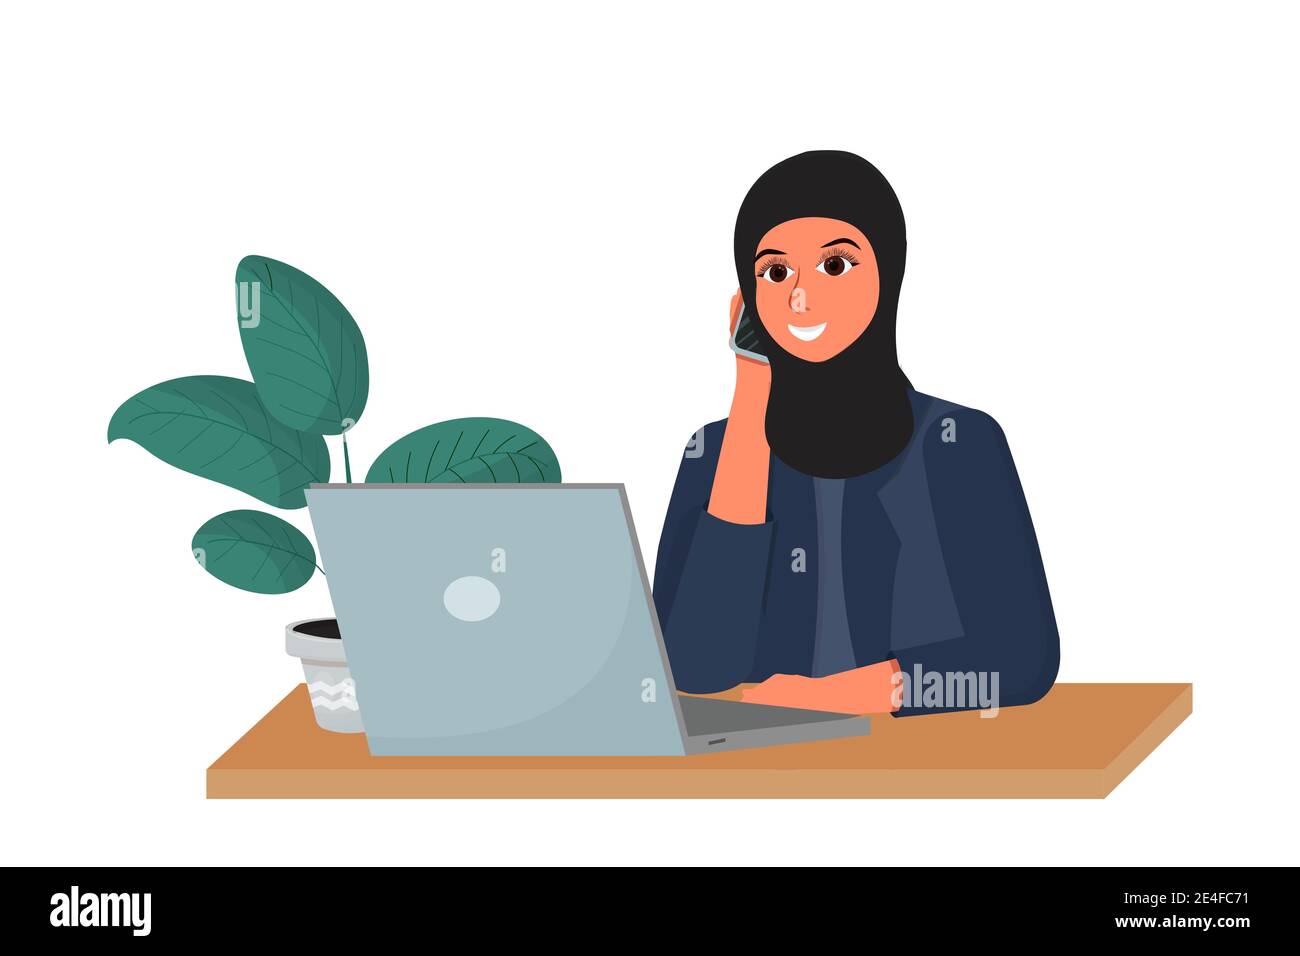 Arab woman in hijab on working place talking by phone and smiling isolated on white background stock vector illustration. Corporate employer, manager Stock Vector